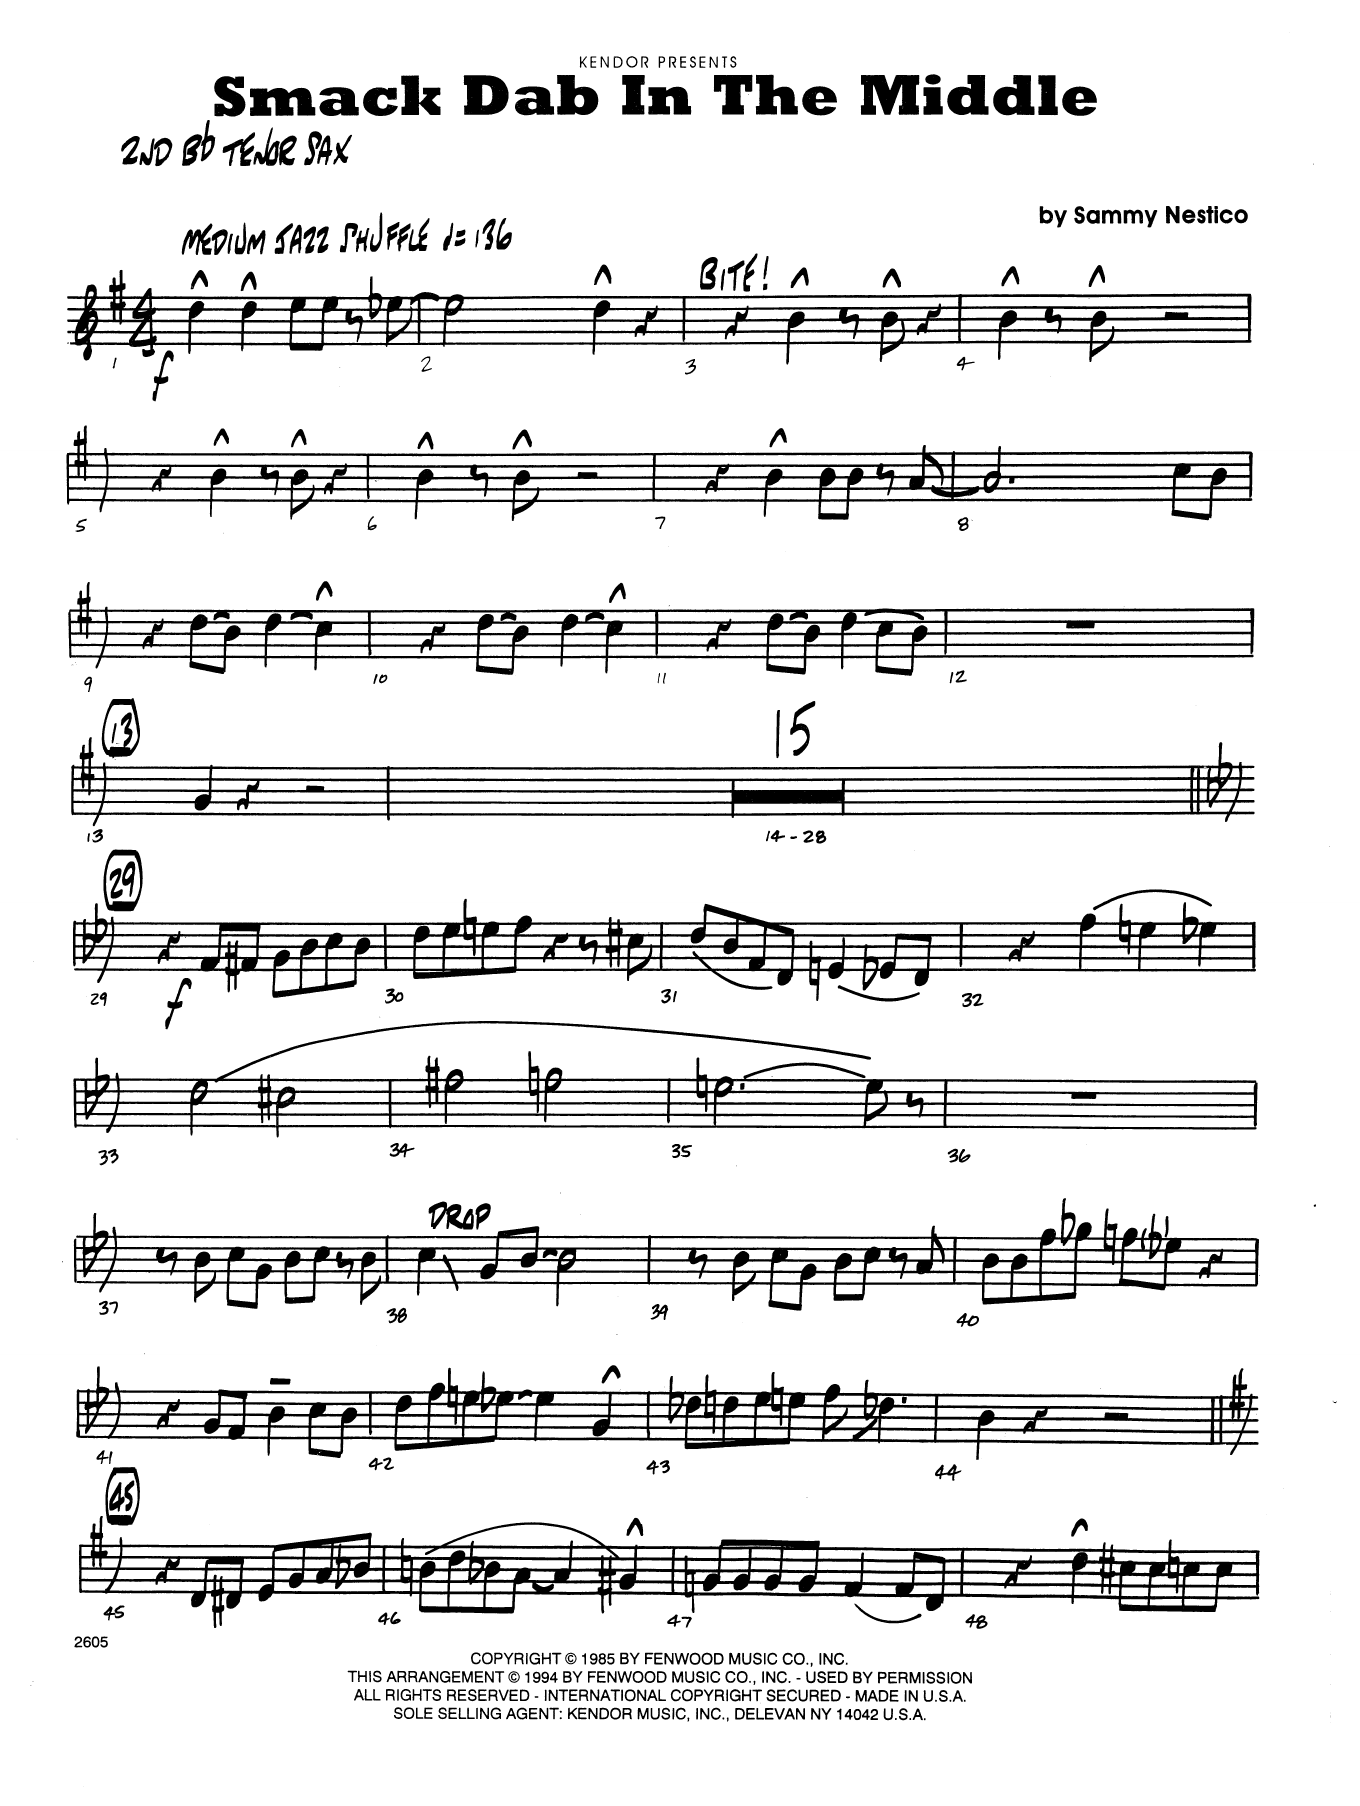 Download Sammy Nestico Smack Dab in the Middle - 2nd Bb Tenor Sheet Music